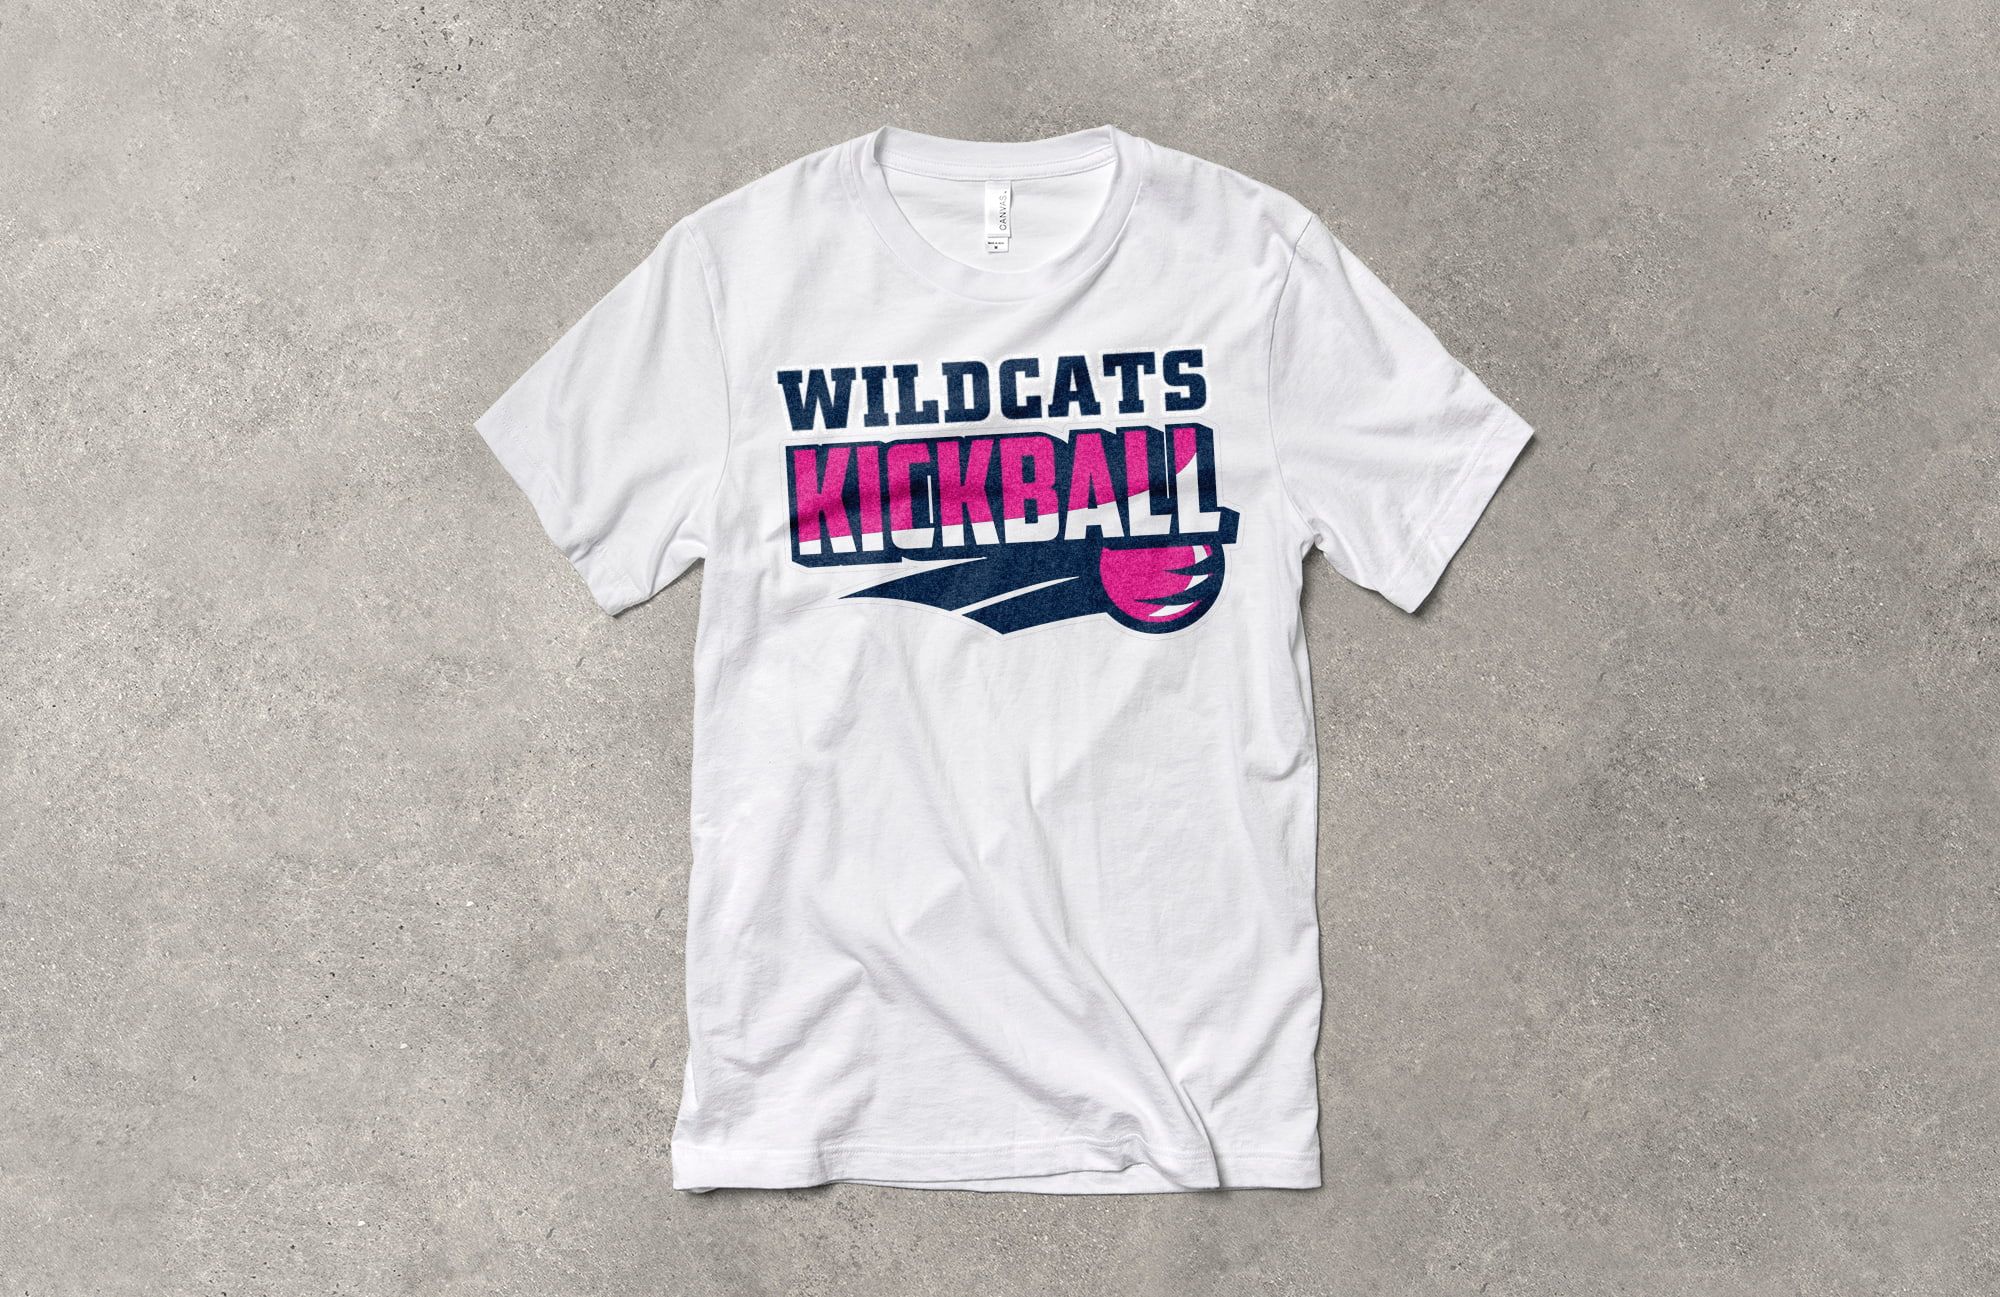 A white t-shirt with a bold navy and magenta design for a kickball team